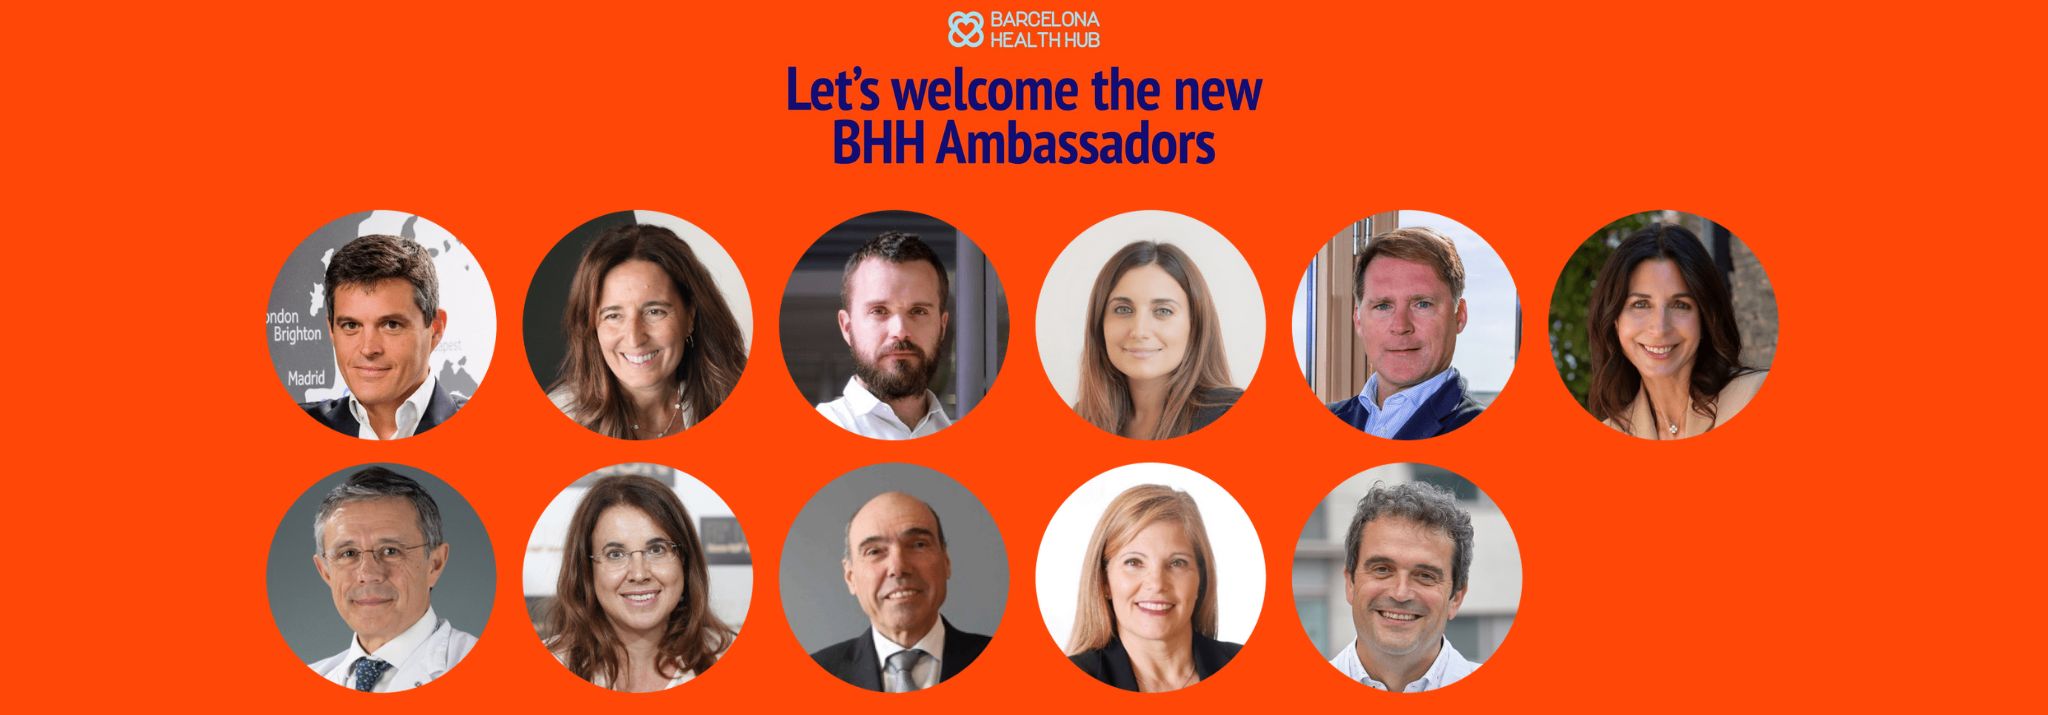 Let’s welcome the new BHH Ambassadors 